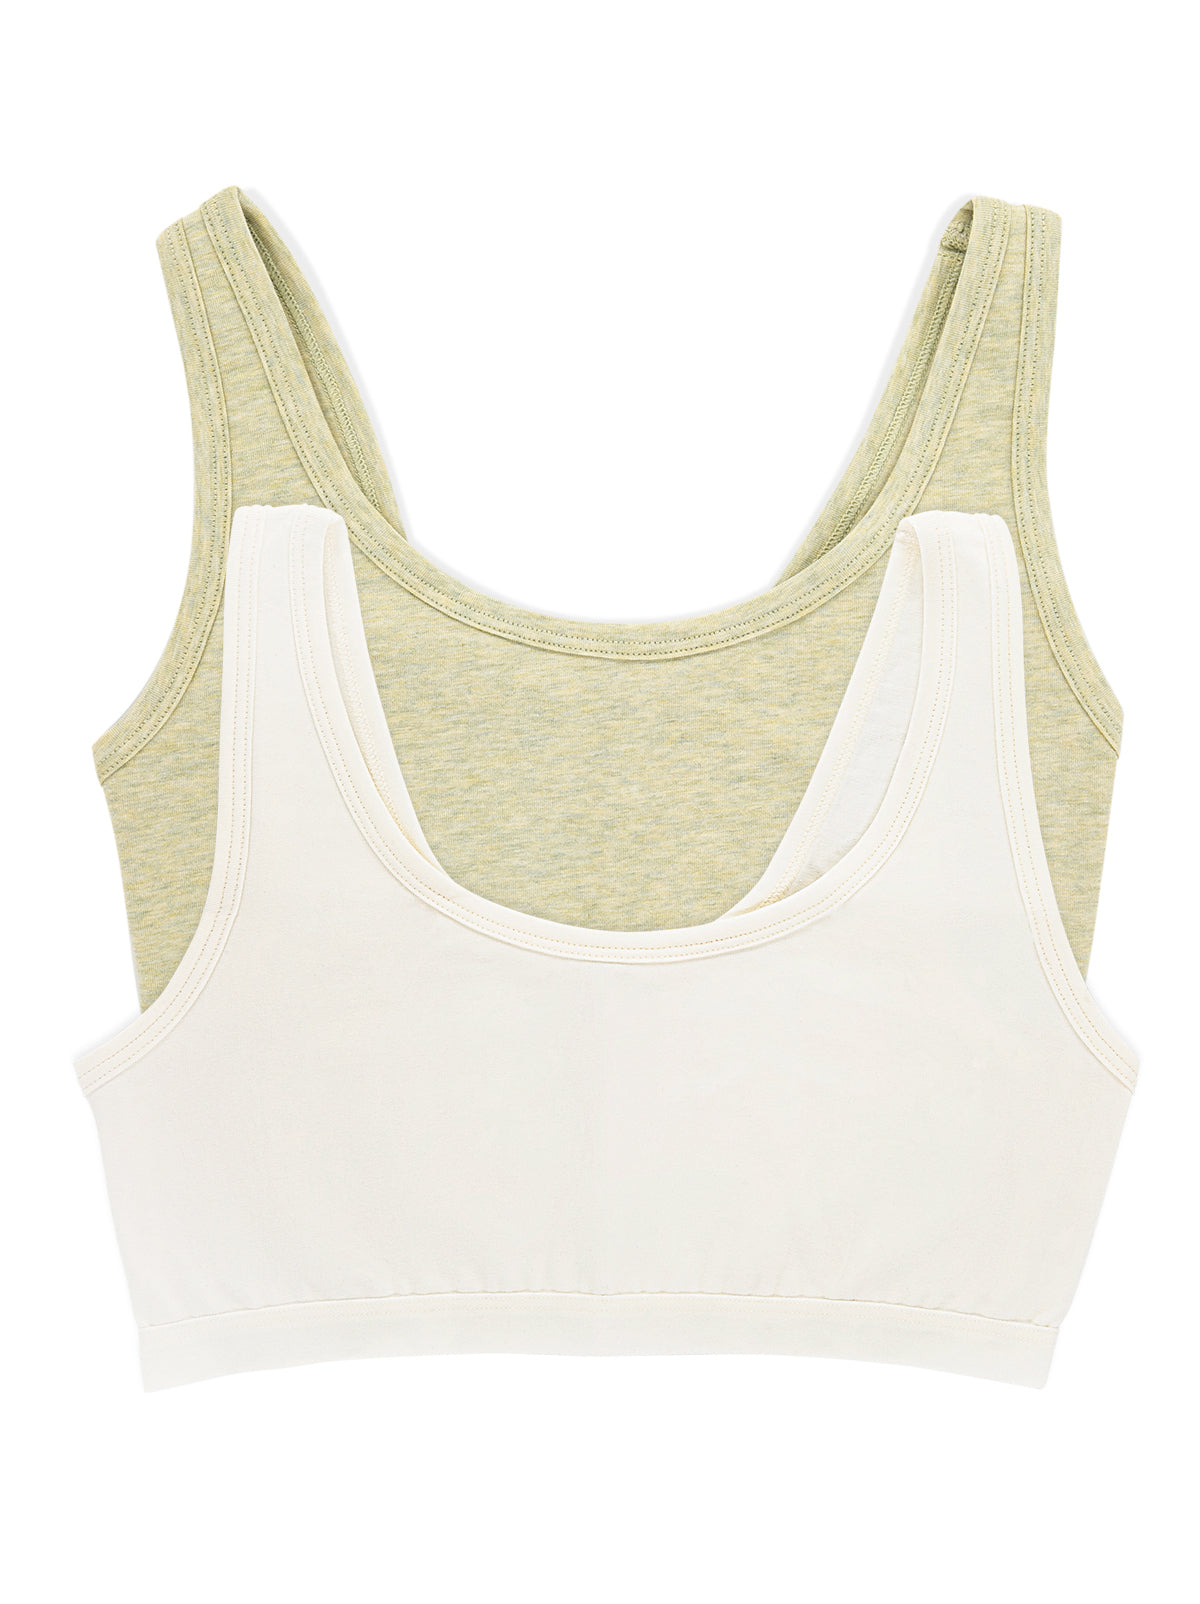 Image of Organic Cotton Stretch Bralette 2-Pack